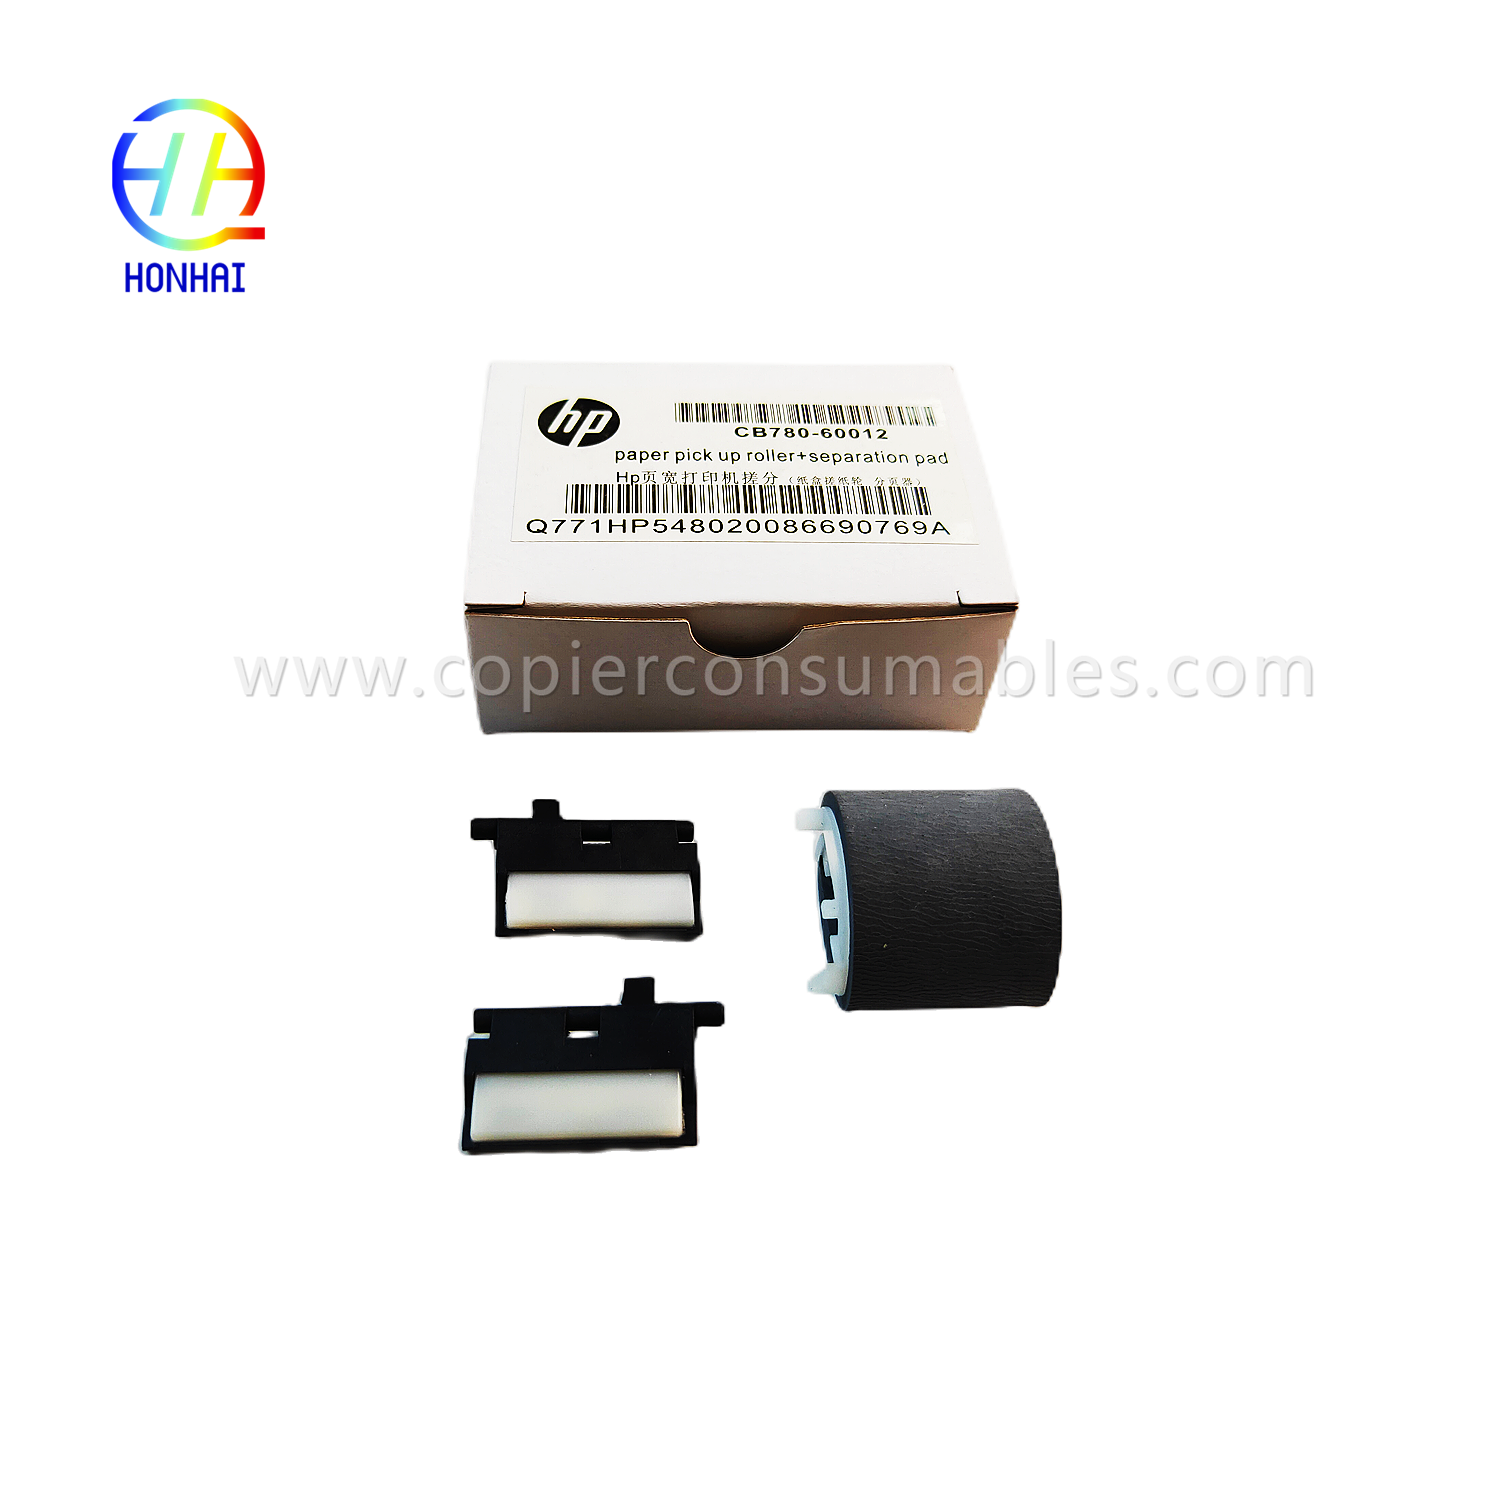 https://www.copierconsumables.com/paper-pickup-roller-separates-pad%ef%bc%88set%ef%bc%89for-hp-pagewide-x585z-x451dn-x476dn-x551dw-x576dw-556dn-586- 452dn-477dn-552-577z-cb780-60012-produto/